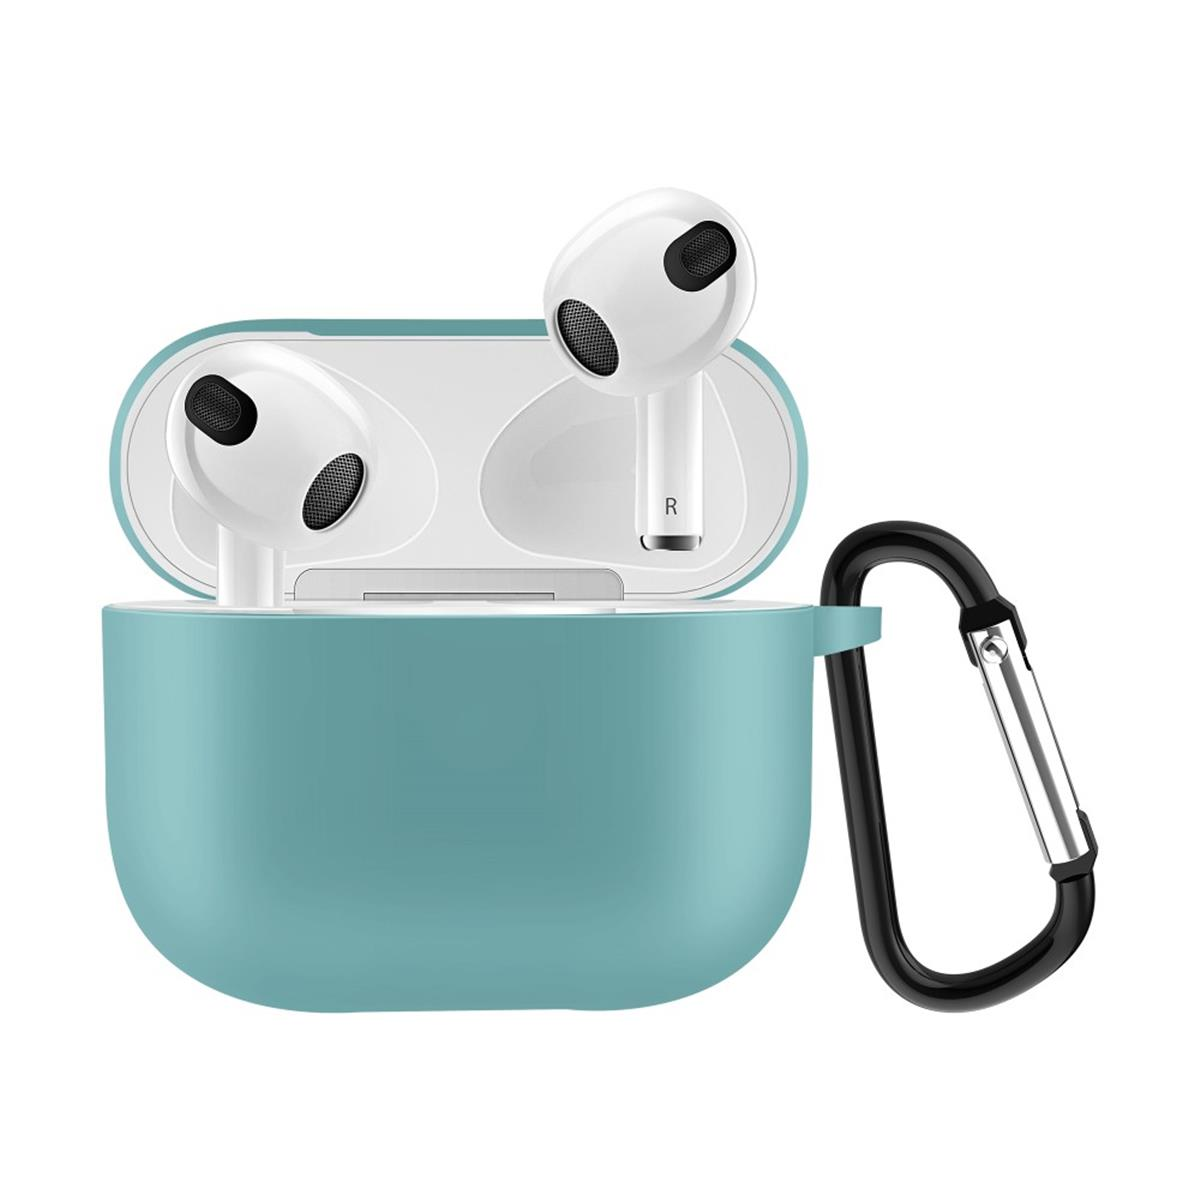 Unisex, Ladecase für Grün, COVERKINGZ 76810 3 Silikoncover Apple AirPods